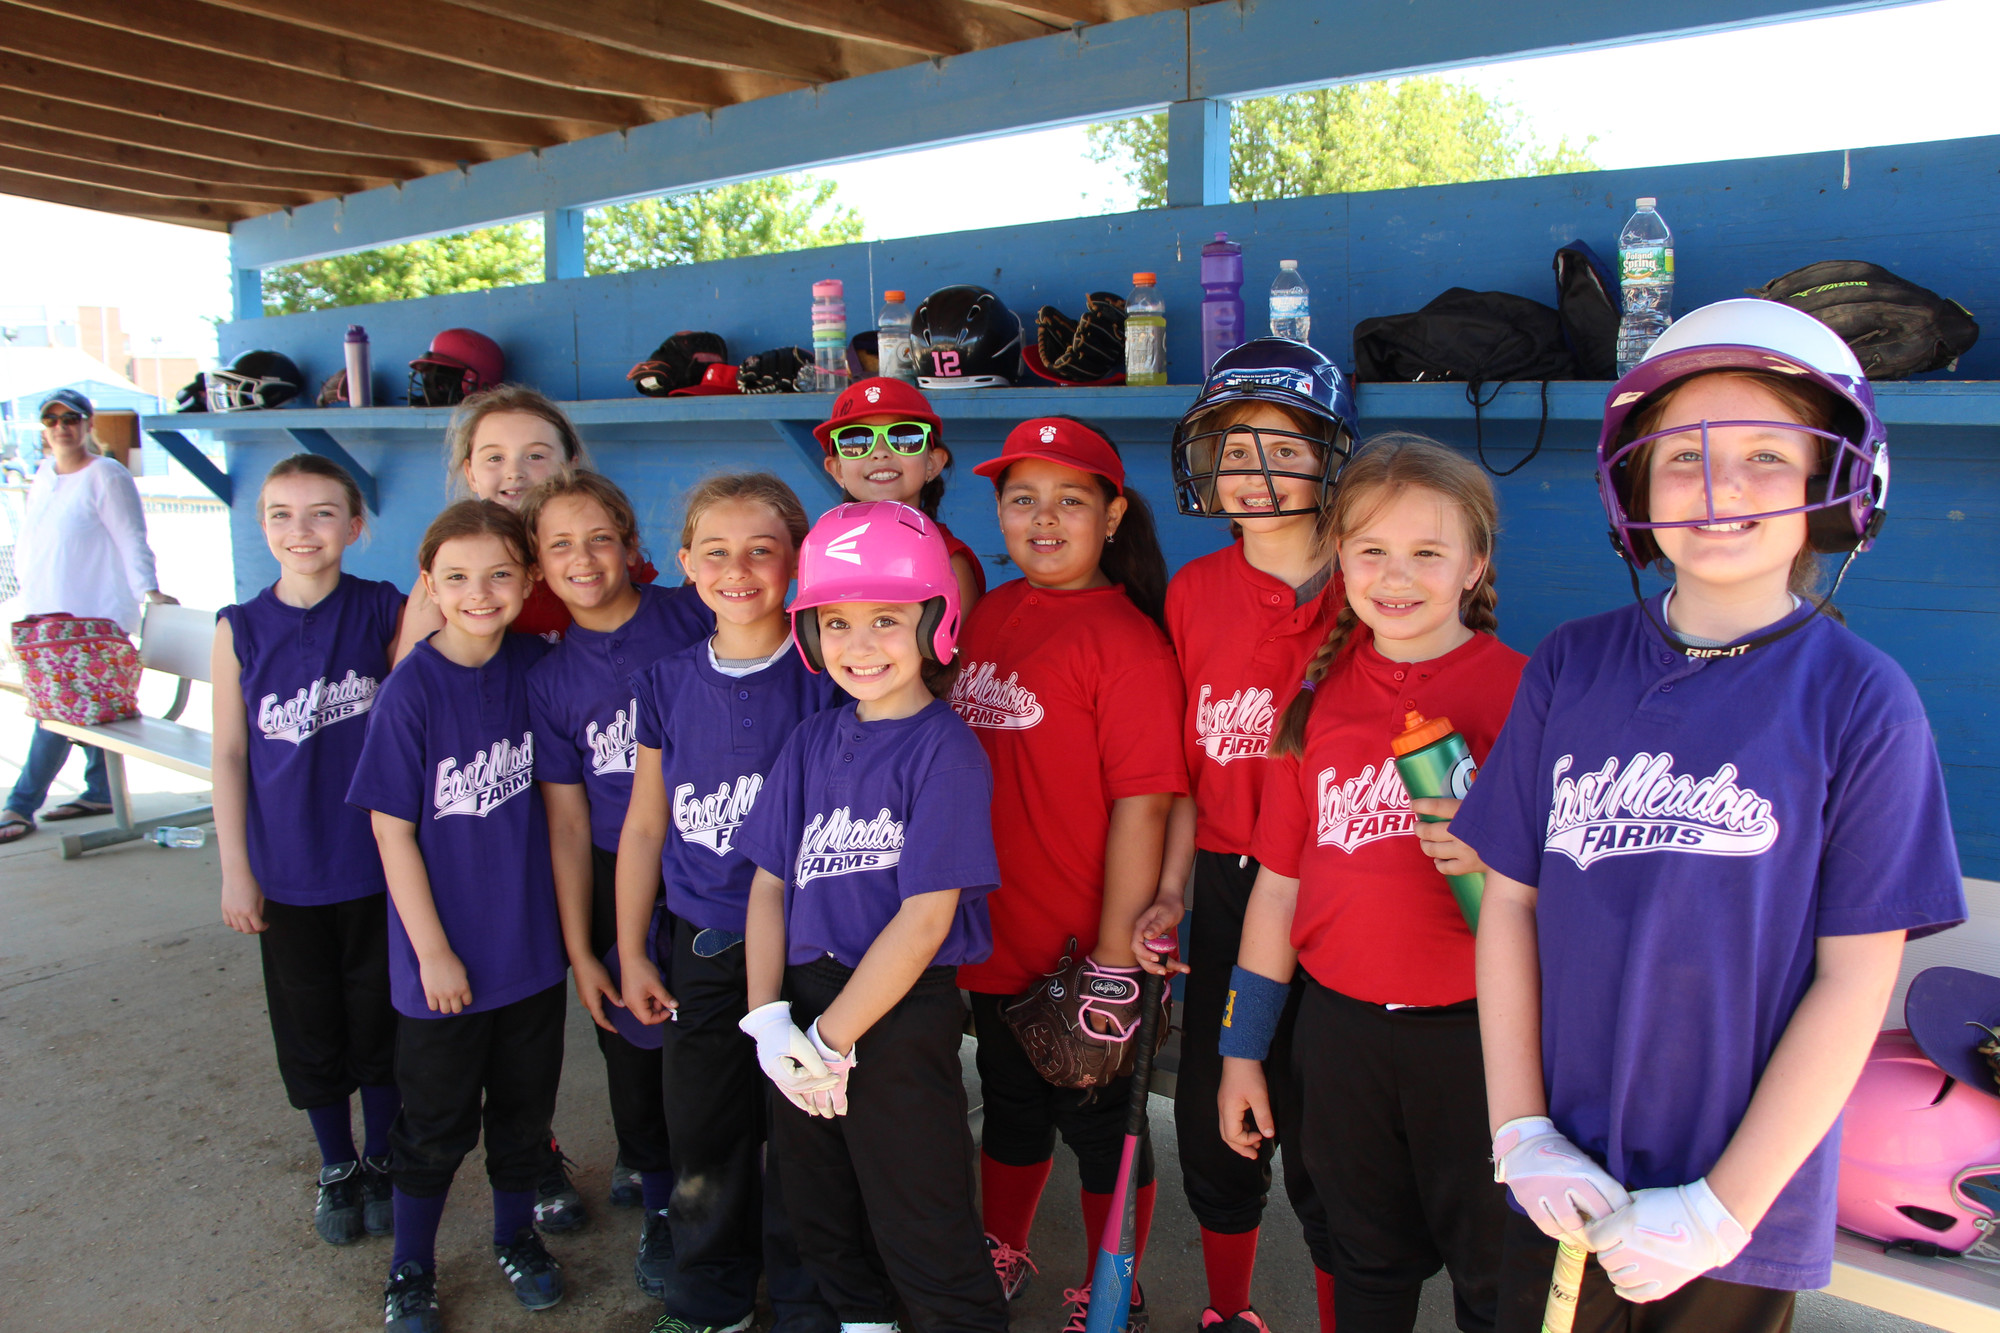 Girls from the East Meadow Baseball Softball Association’s Farm Division were ready to play ball at the league’s annual community picnic last Saturday at its Merrick Avenue complex.